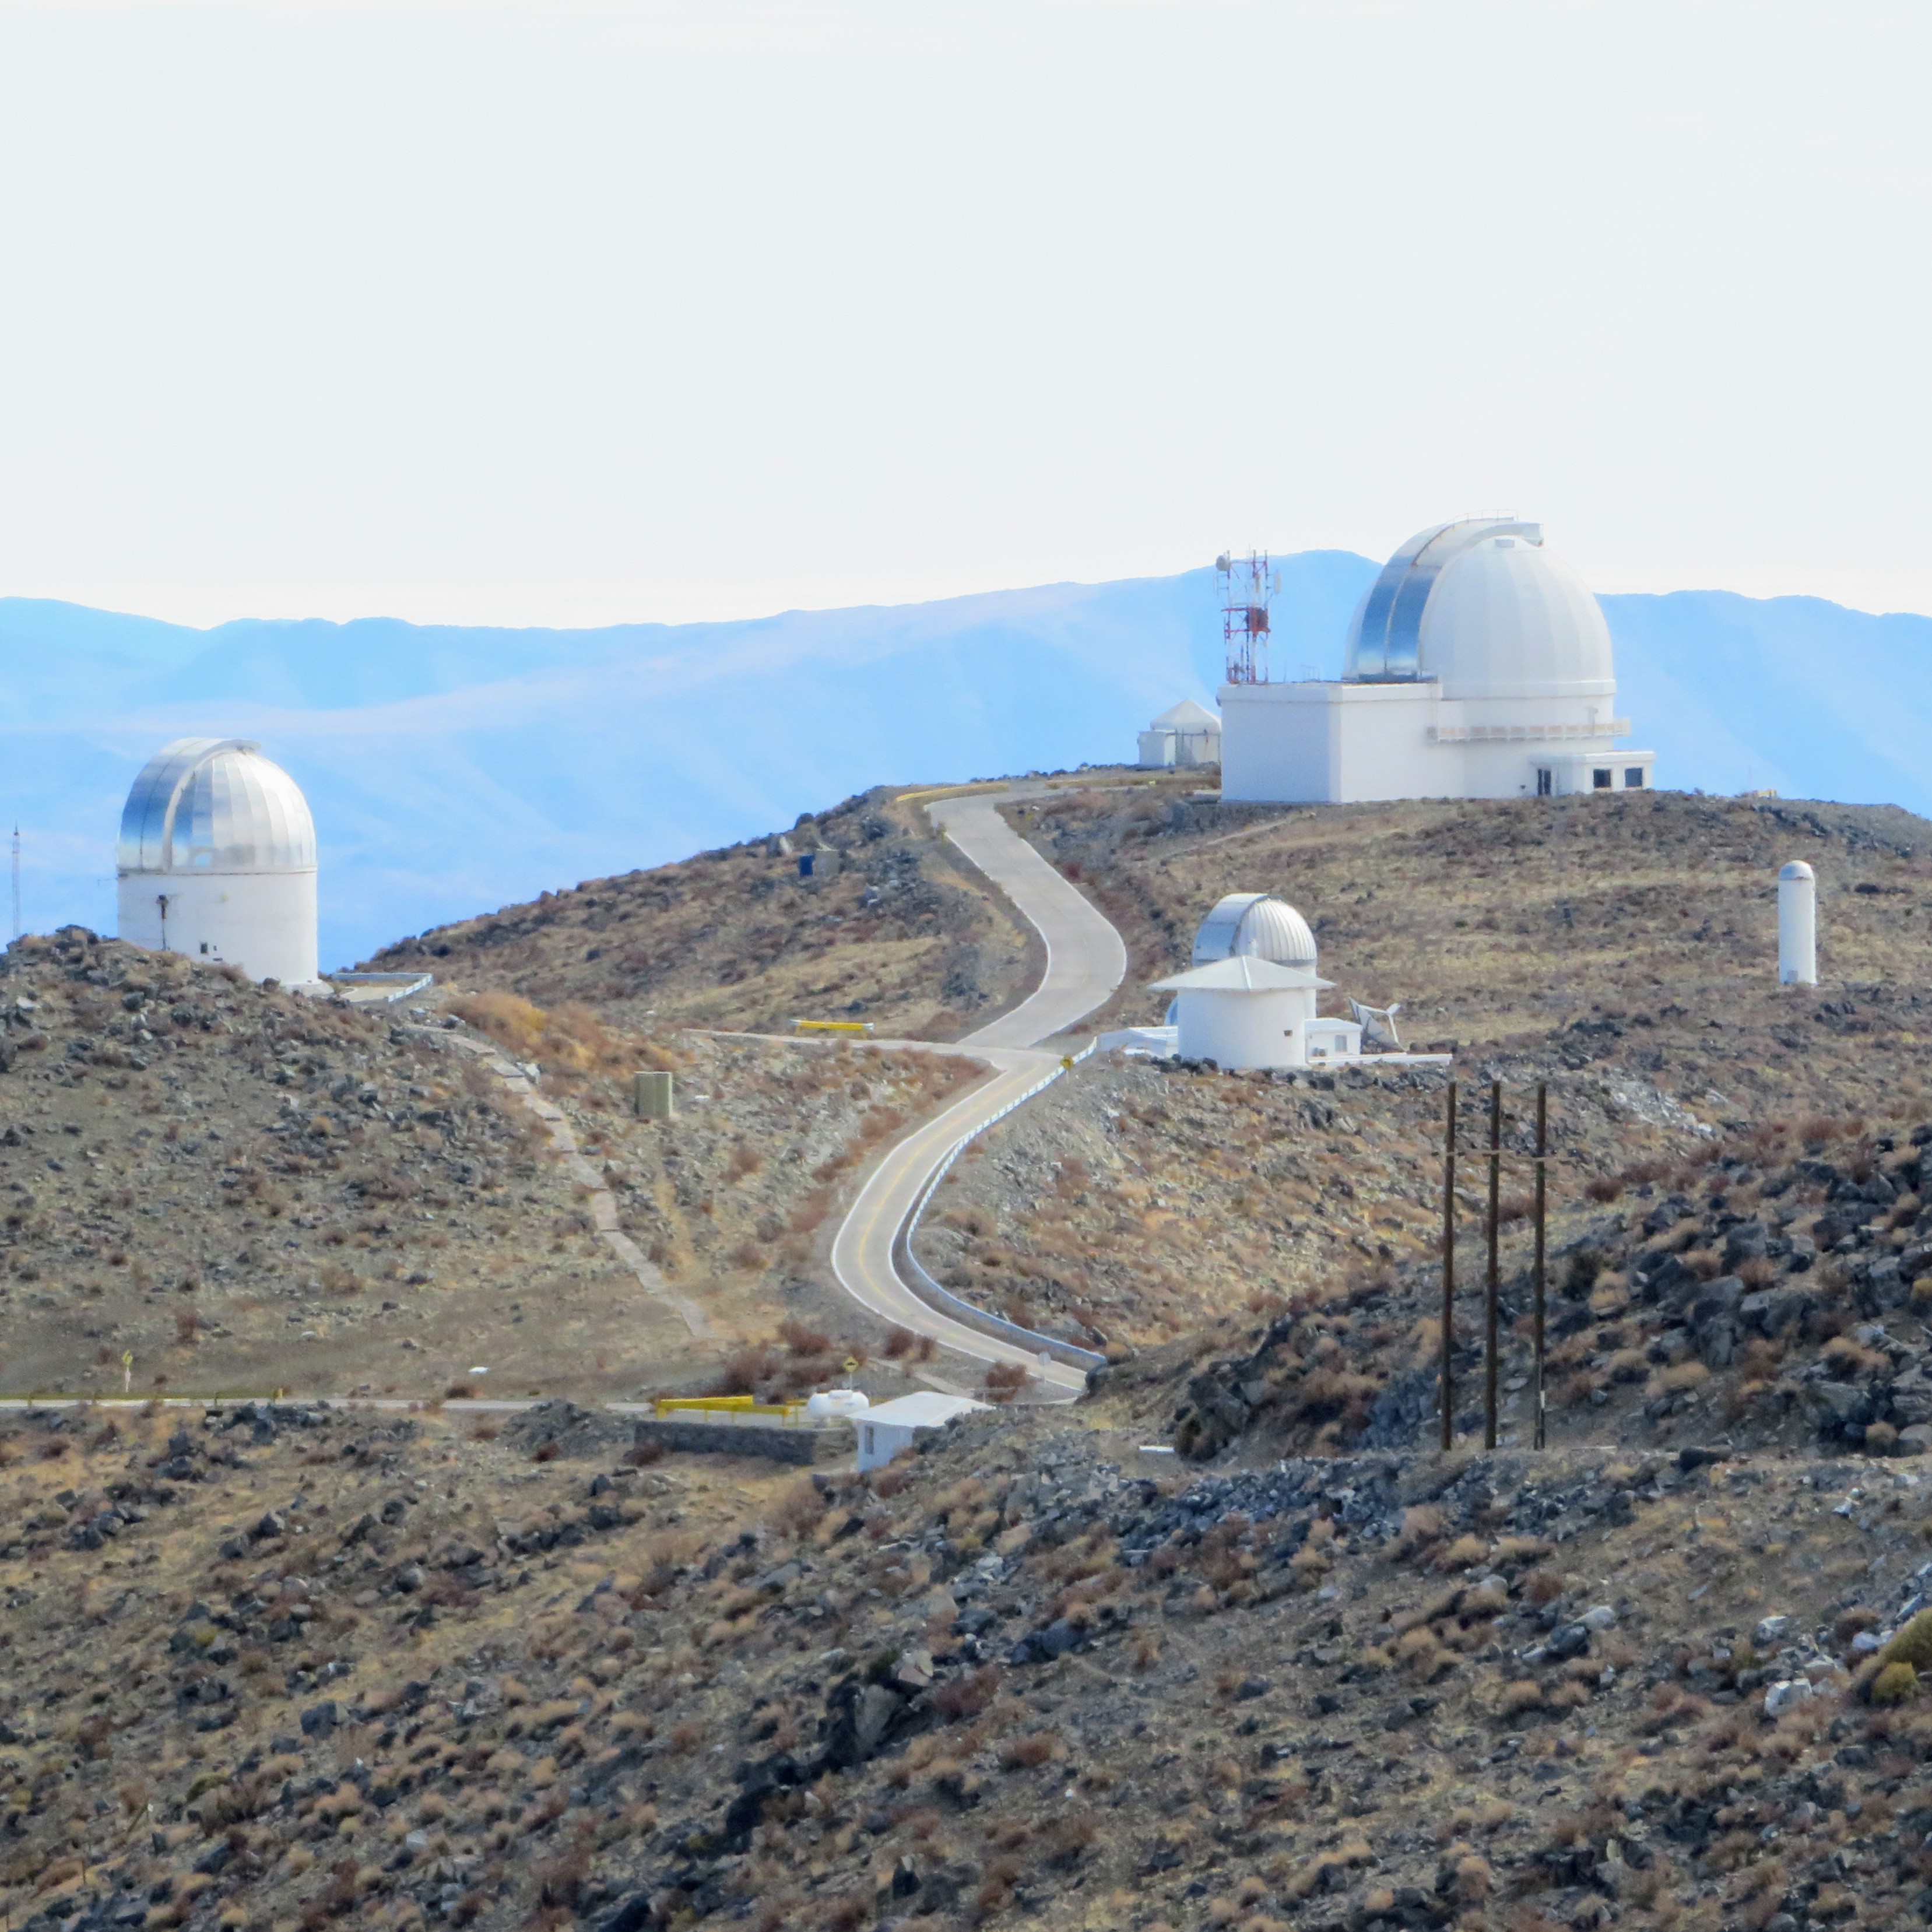 Magellan telescopes at the Las Campanas Observatory in Chile